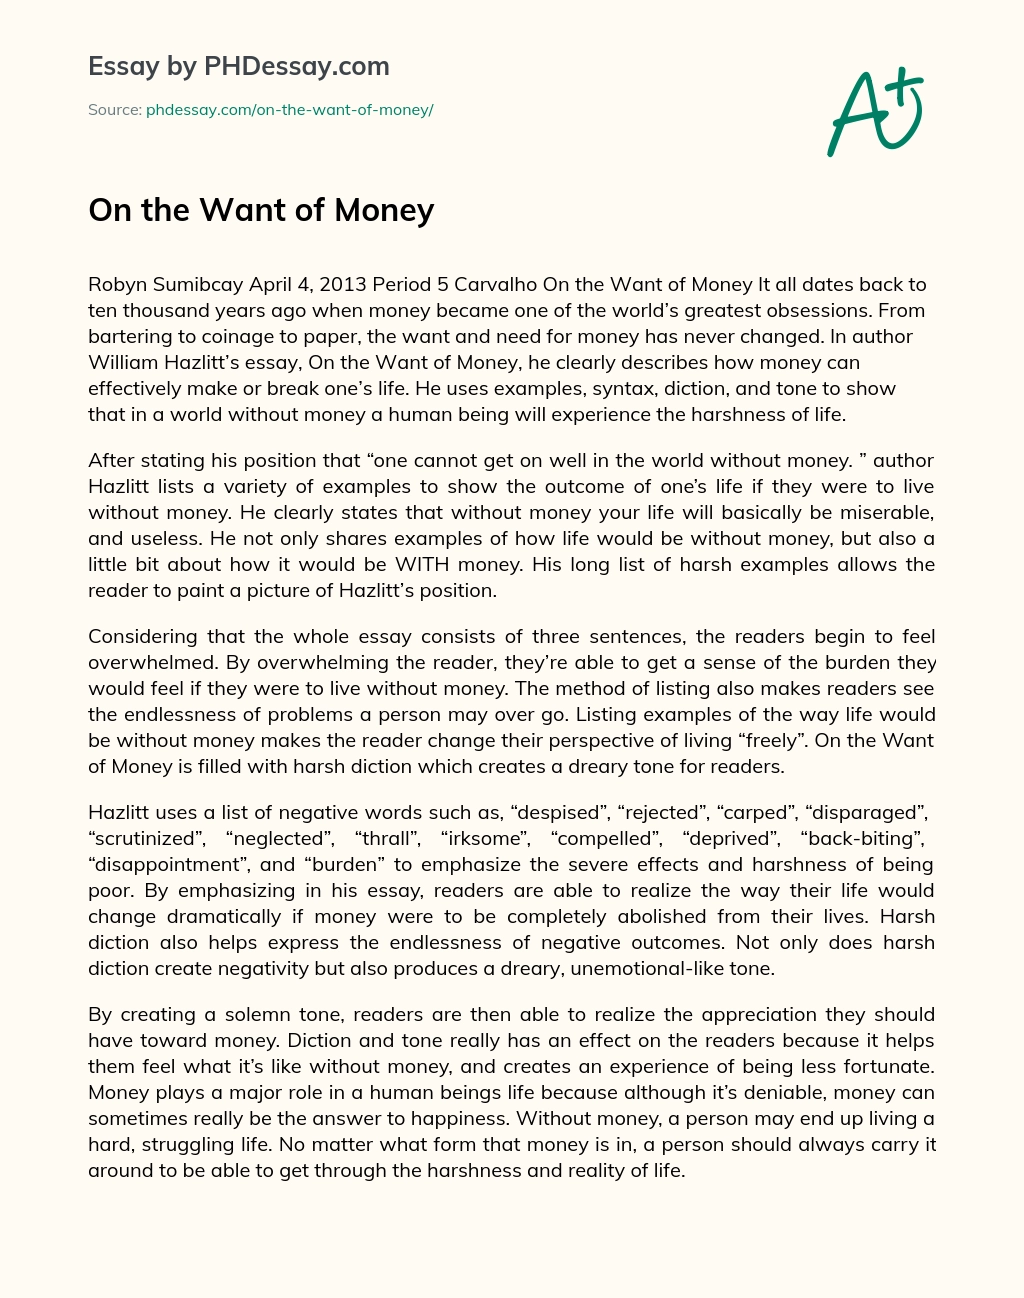 On the Want of Money essay